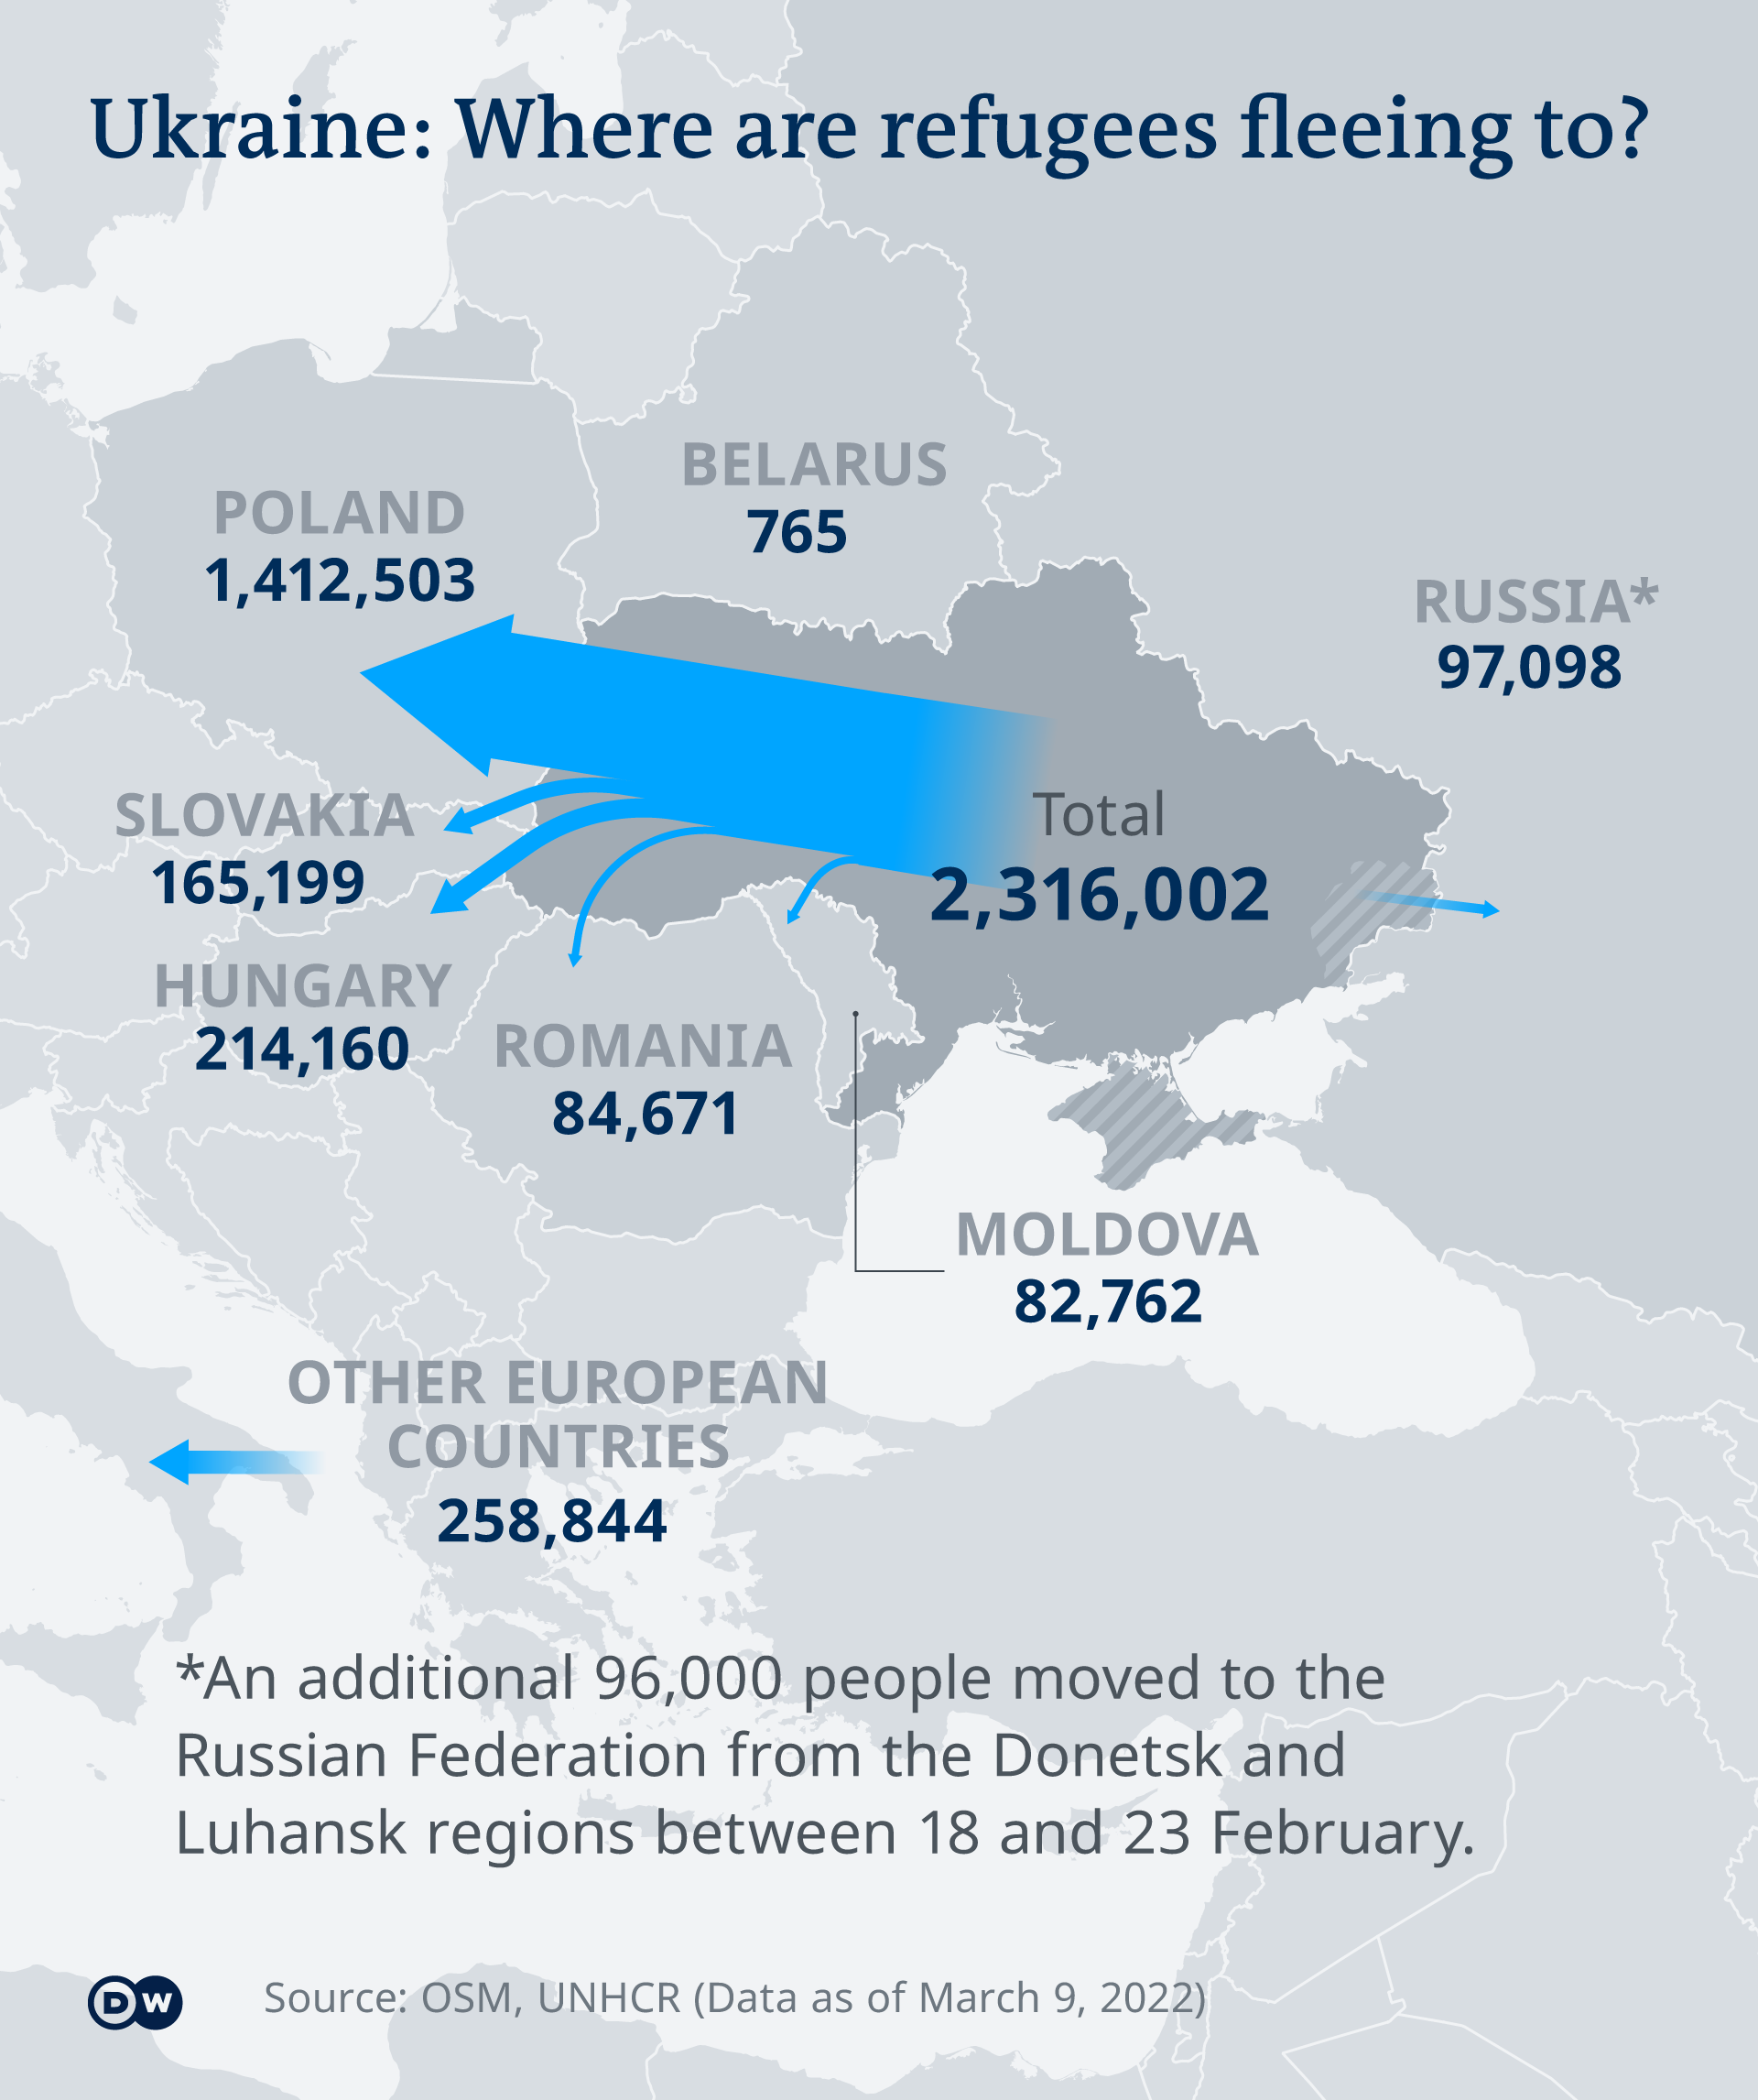 A map showing where refugees are fleeing from Ukraine